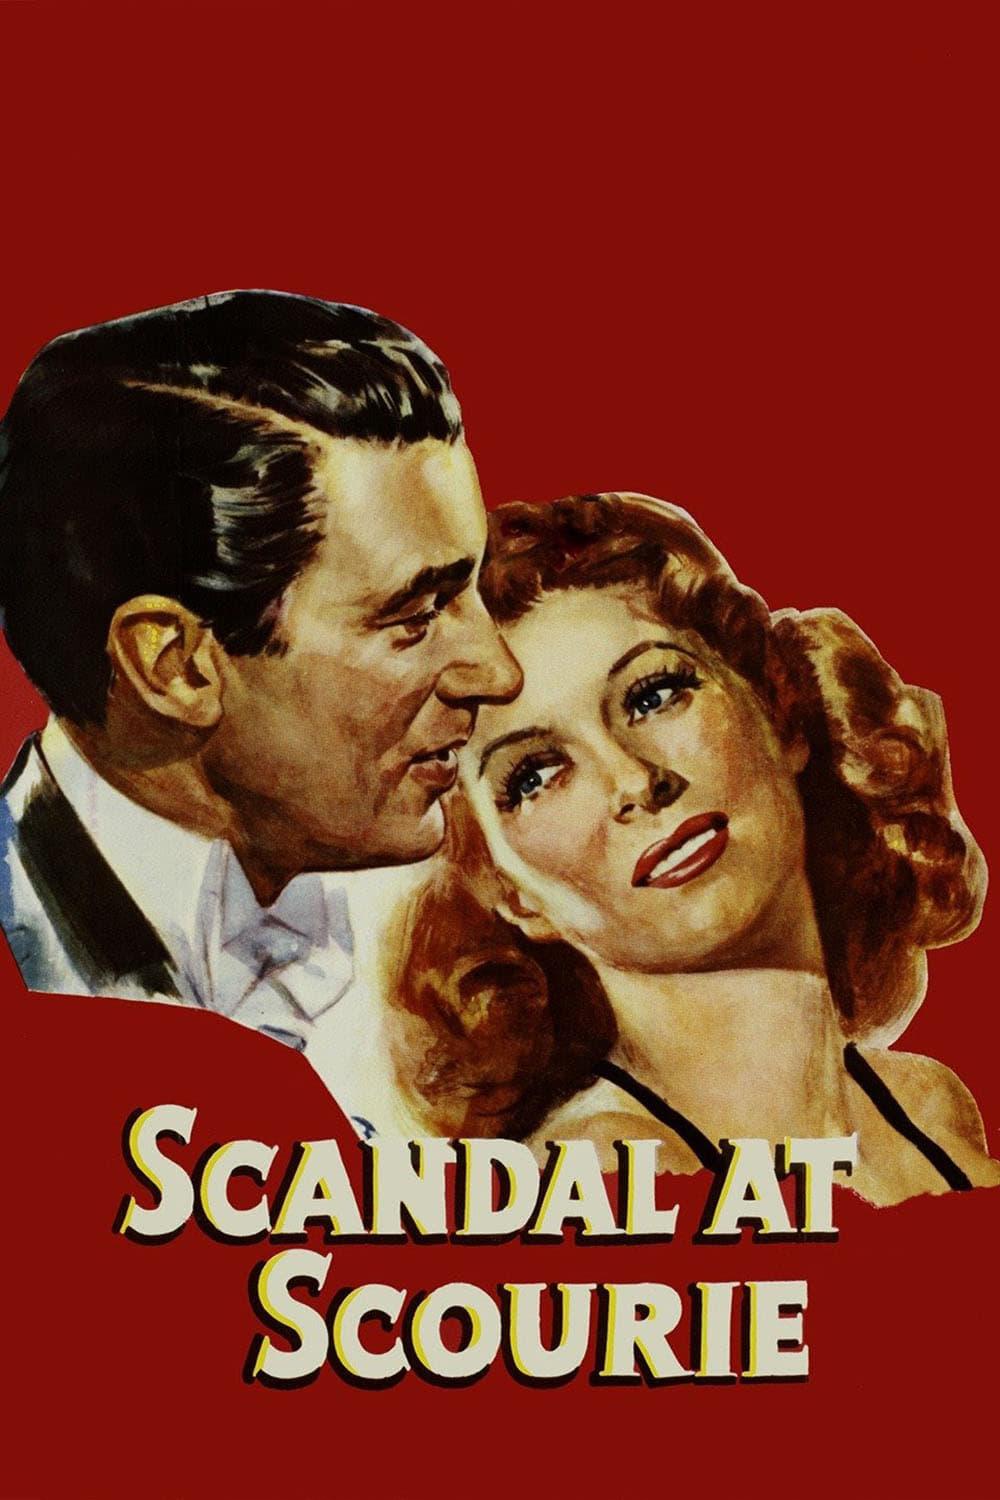 Scandal at Scourie poster